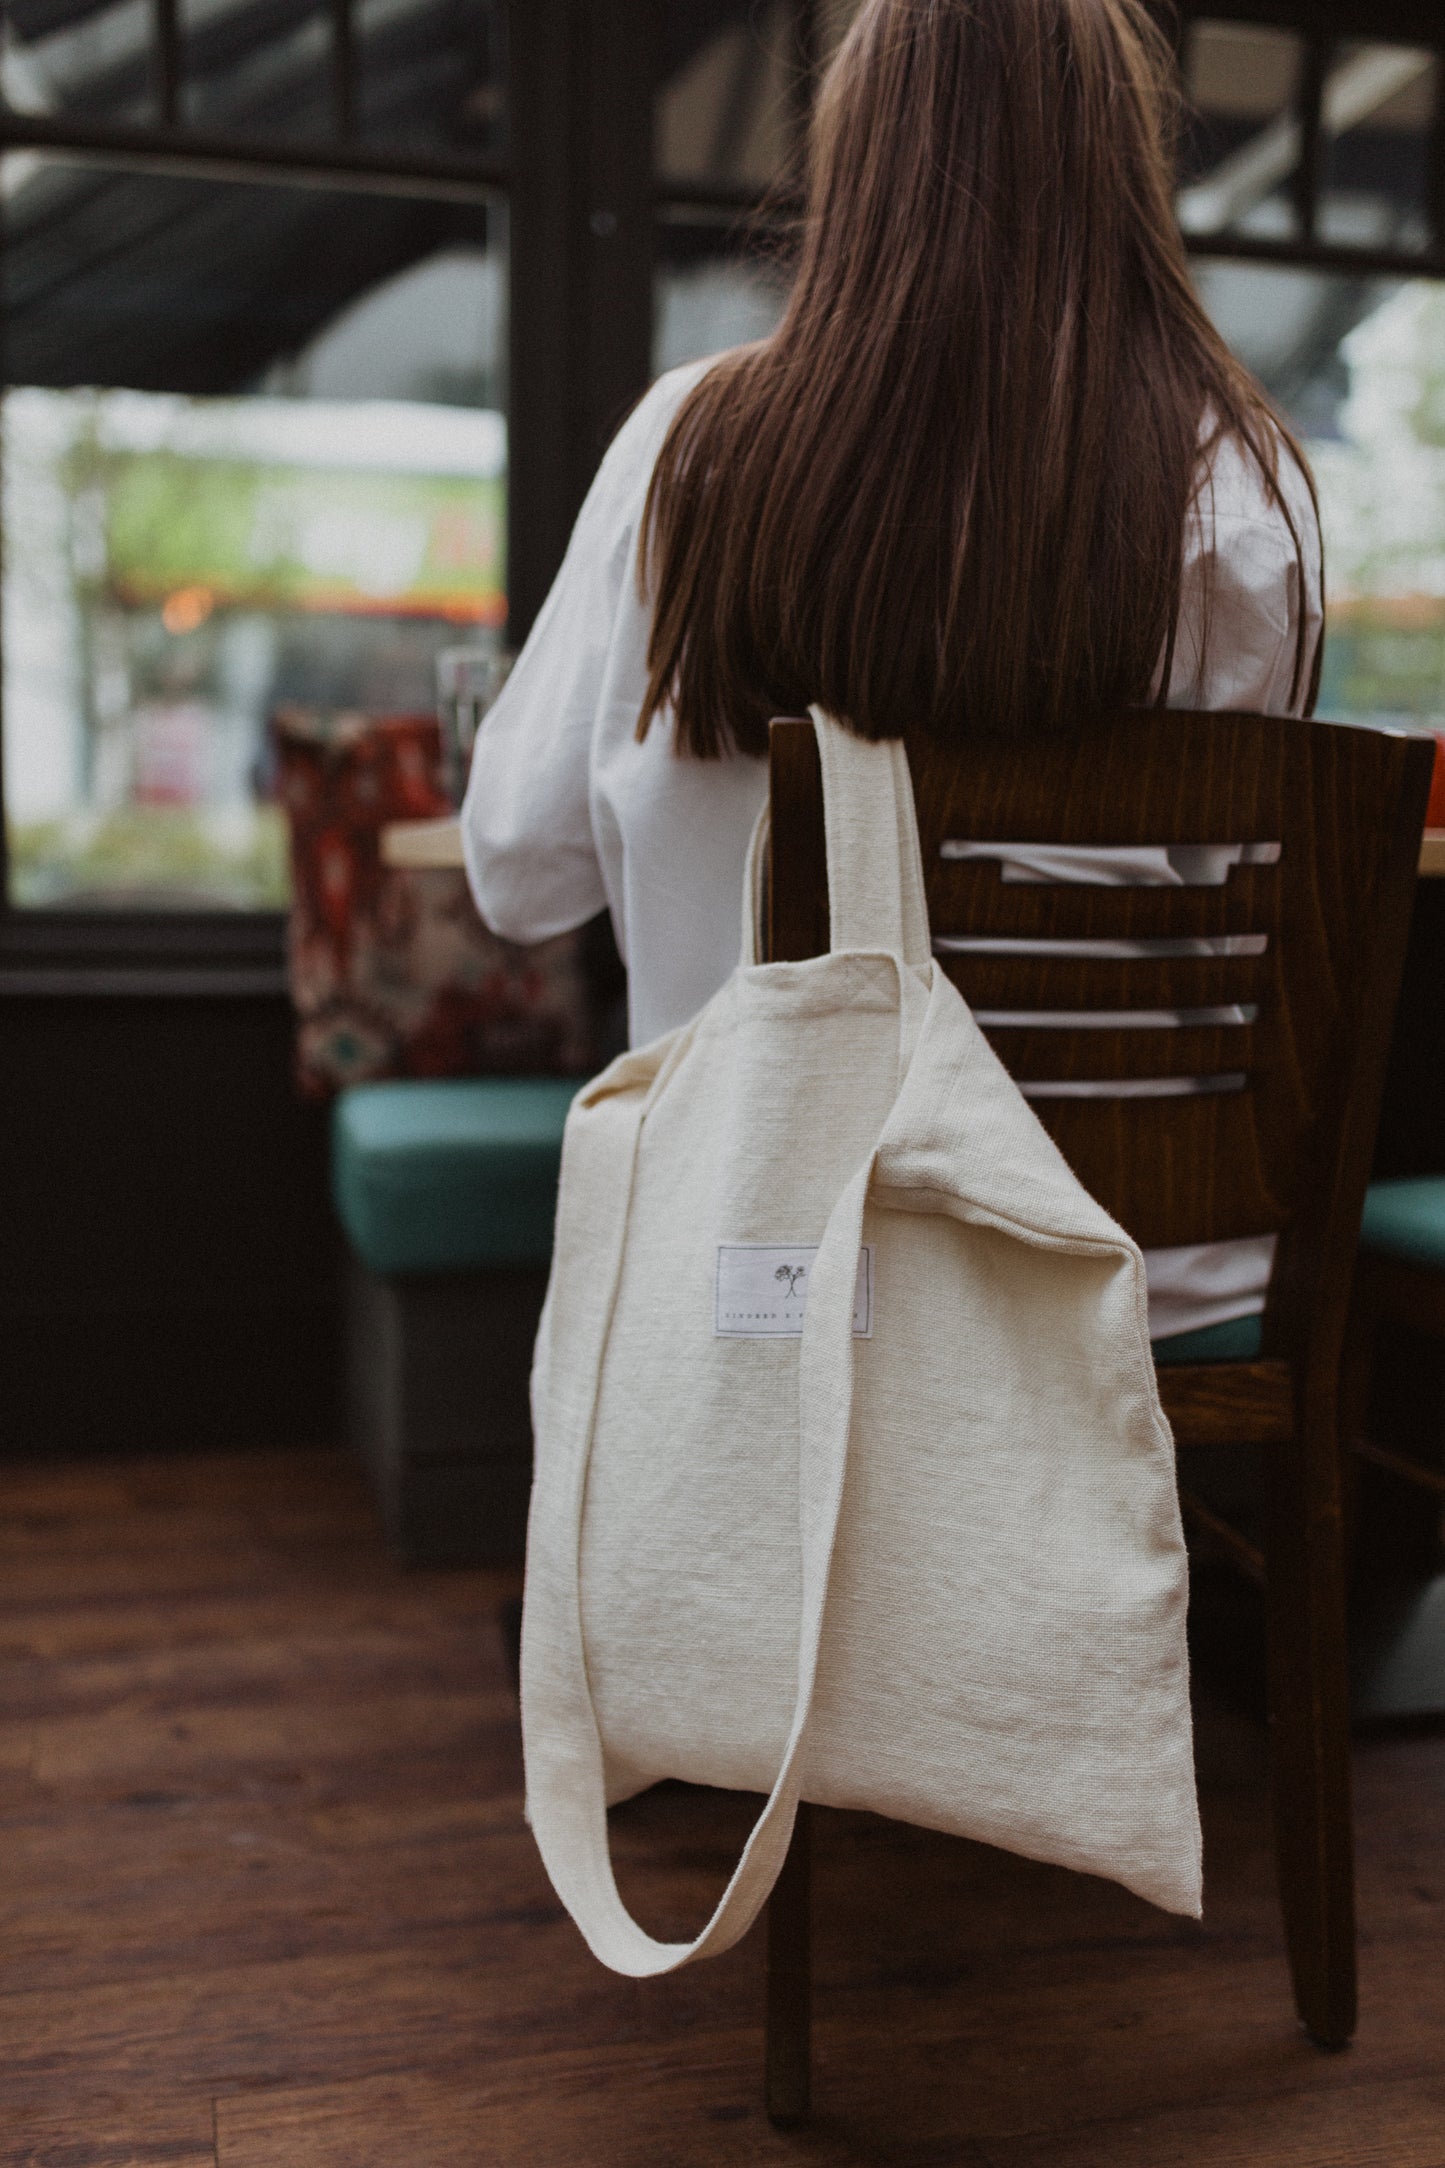 KINDRED X FLOURISH BAG | Inspired, Thoughtful, Considerate More than just a bag, this ethically sourced, any occasion accessory is part of a brighter future. Produced in Ireland by a talented team of seamstresses and cutters that have came through Flouris